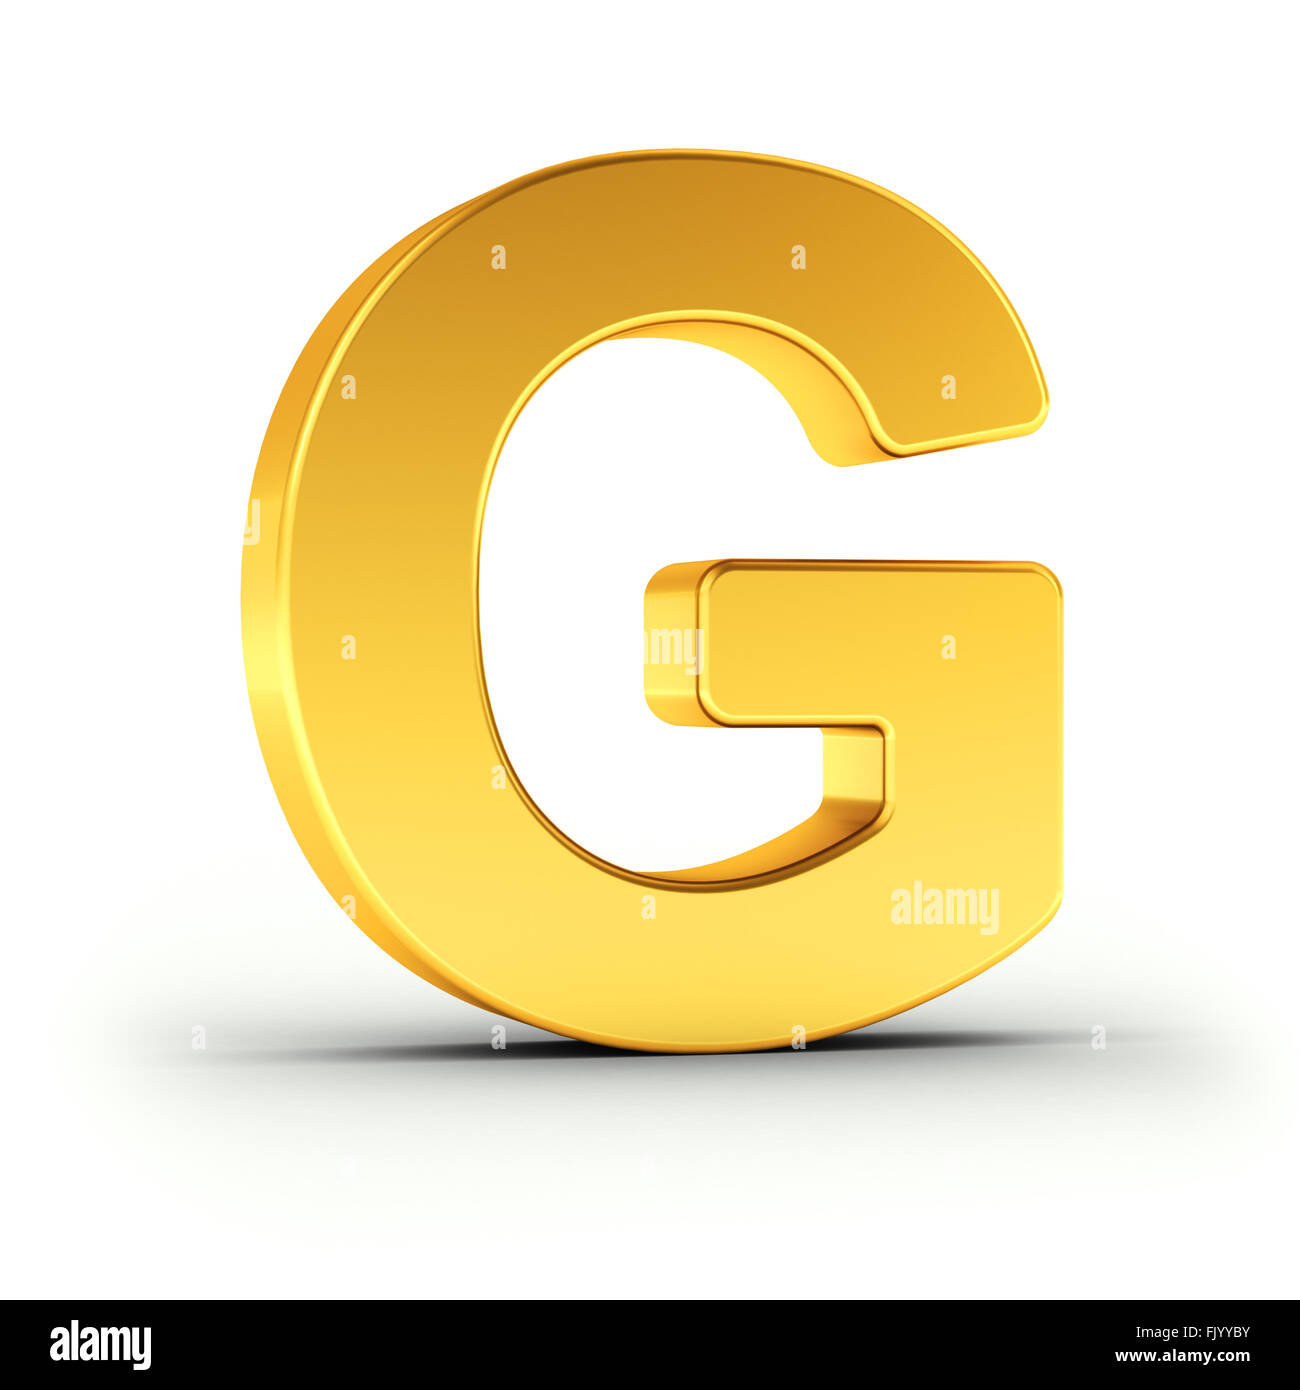 The Letter G as a polished golden object Stock Photo